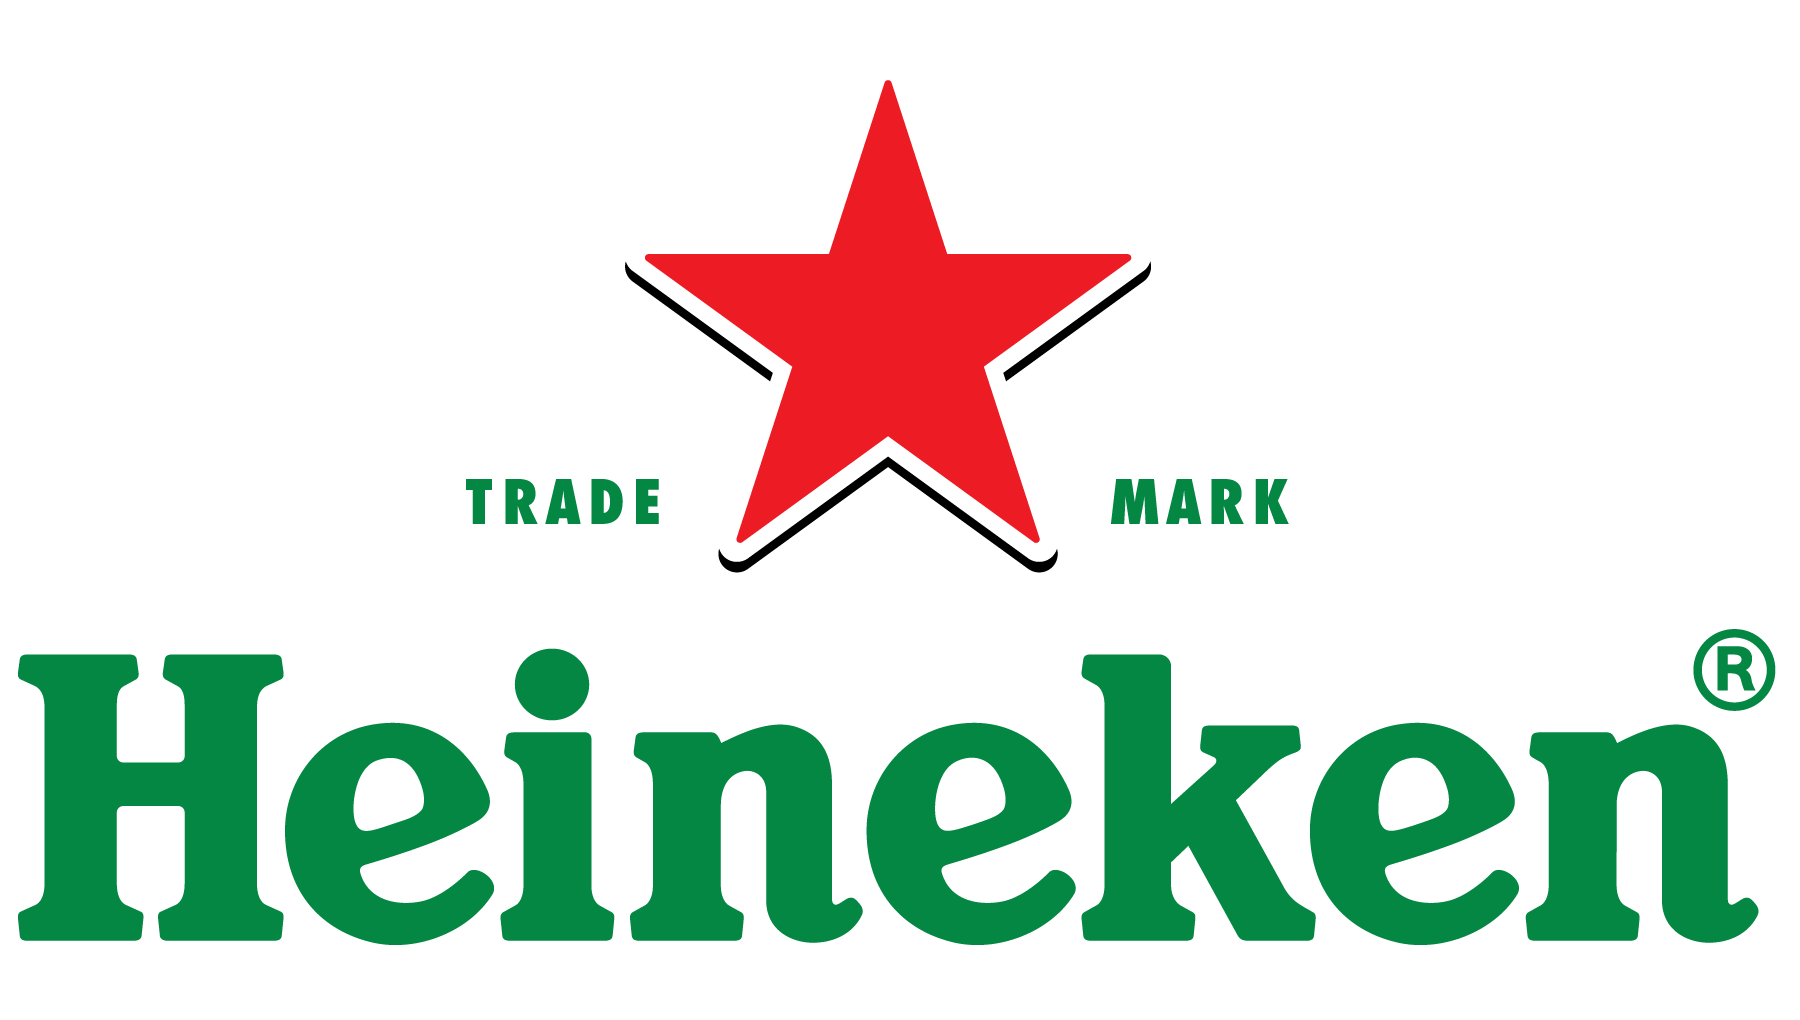 Heineken Logo - Heineken Logo, Heineken Symbol Meaning, History and Evolution